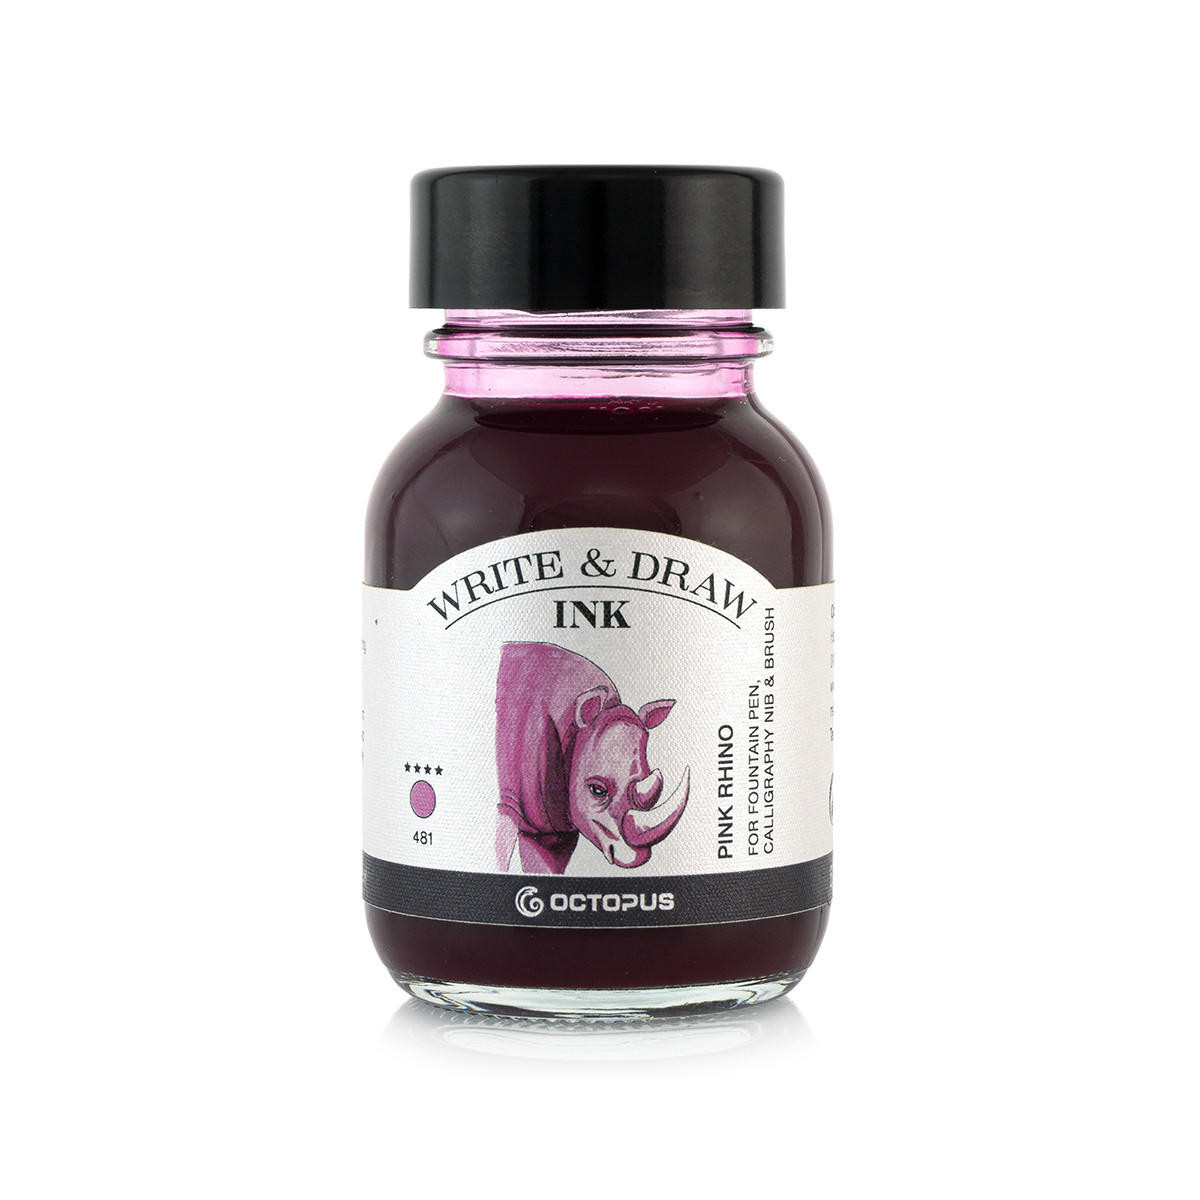 Octopus Fluids Write and Draw Ink 50ml 481 Pink Rhino